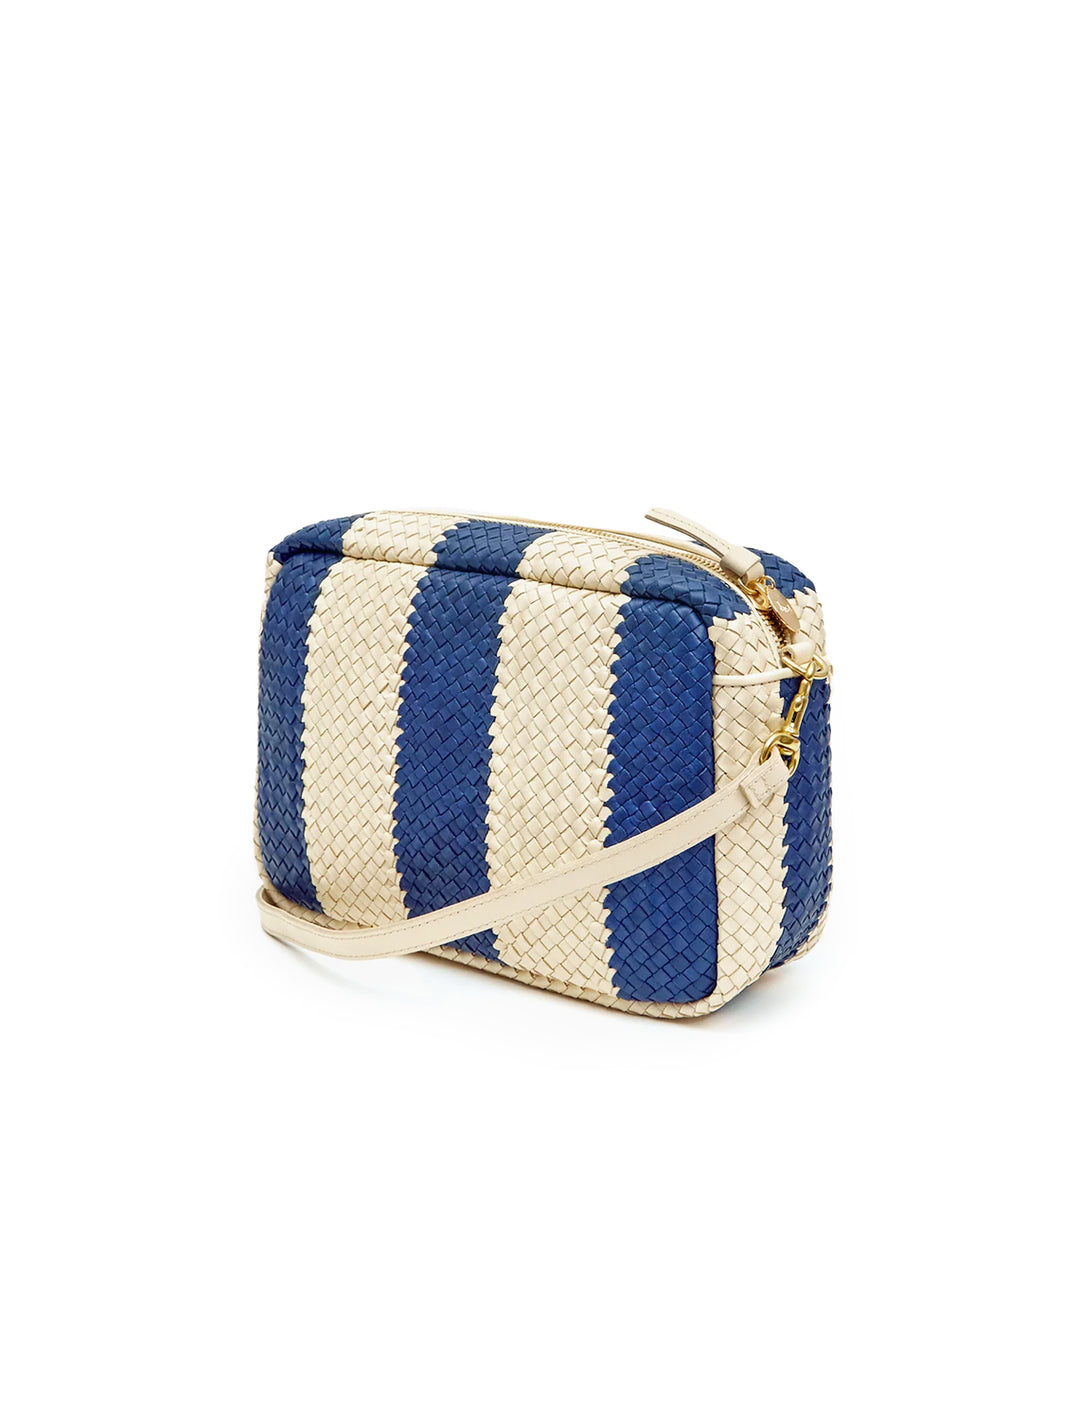 Side angle view of marisol in indigo and cream woven racing stripes